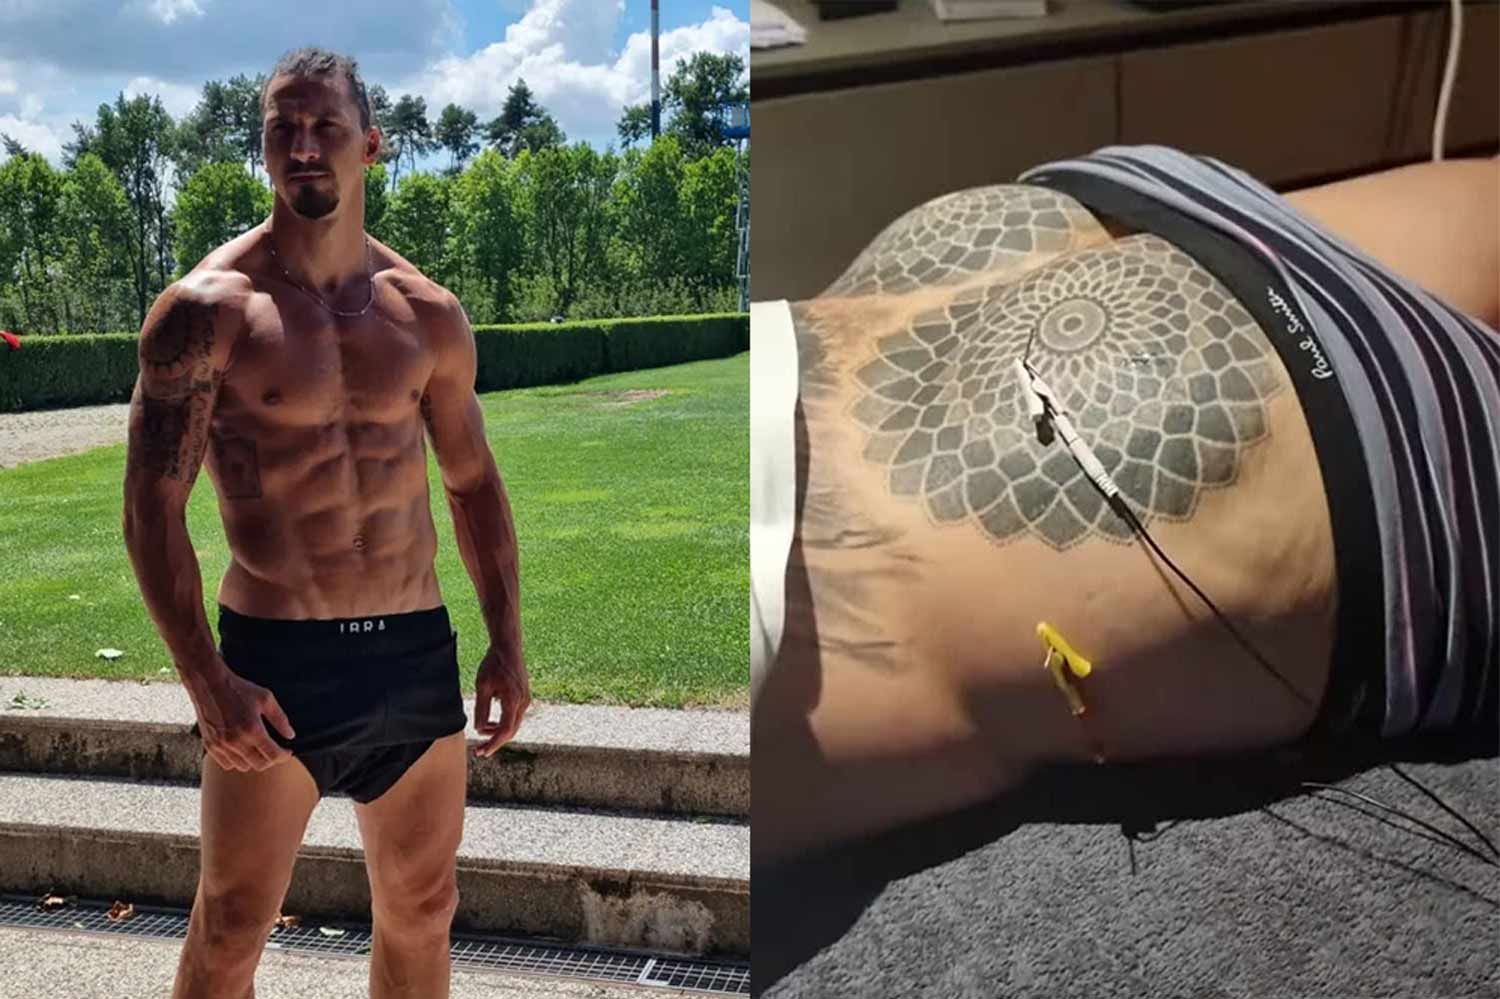 Zlatan Ibrahimovic Reveals The Secret To His Famous 'Buns Of Steel'